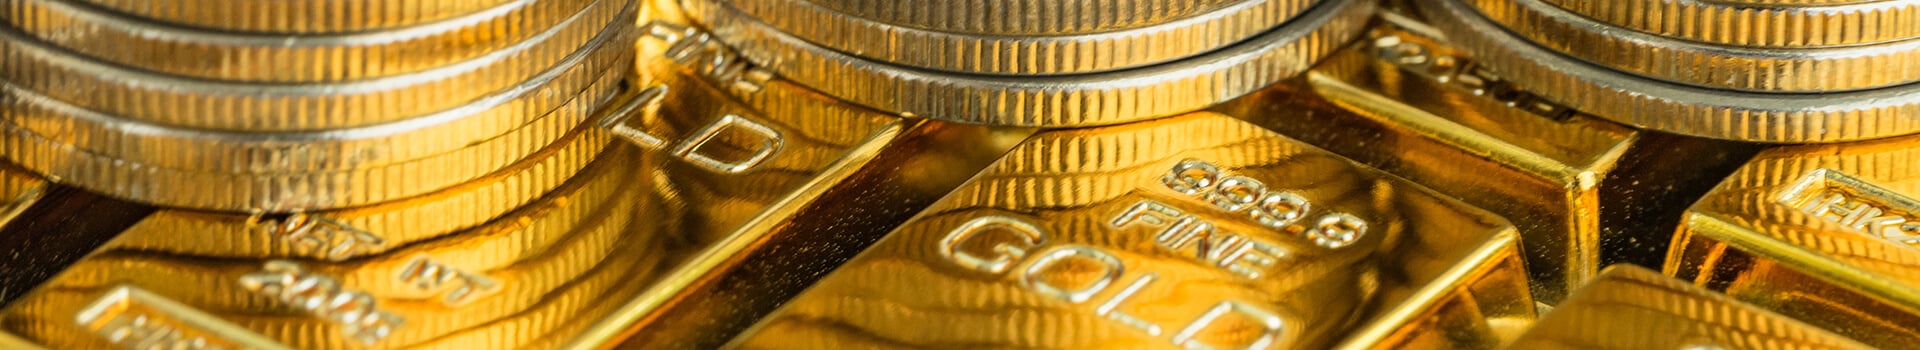 gold bars and coins header